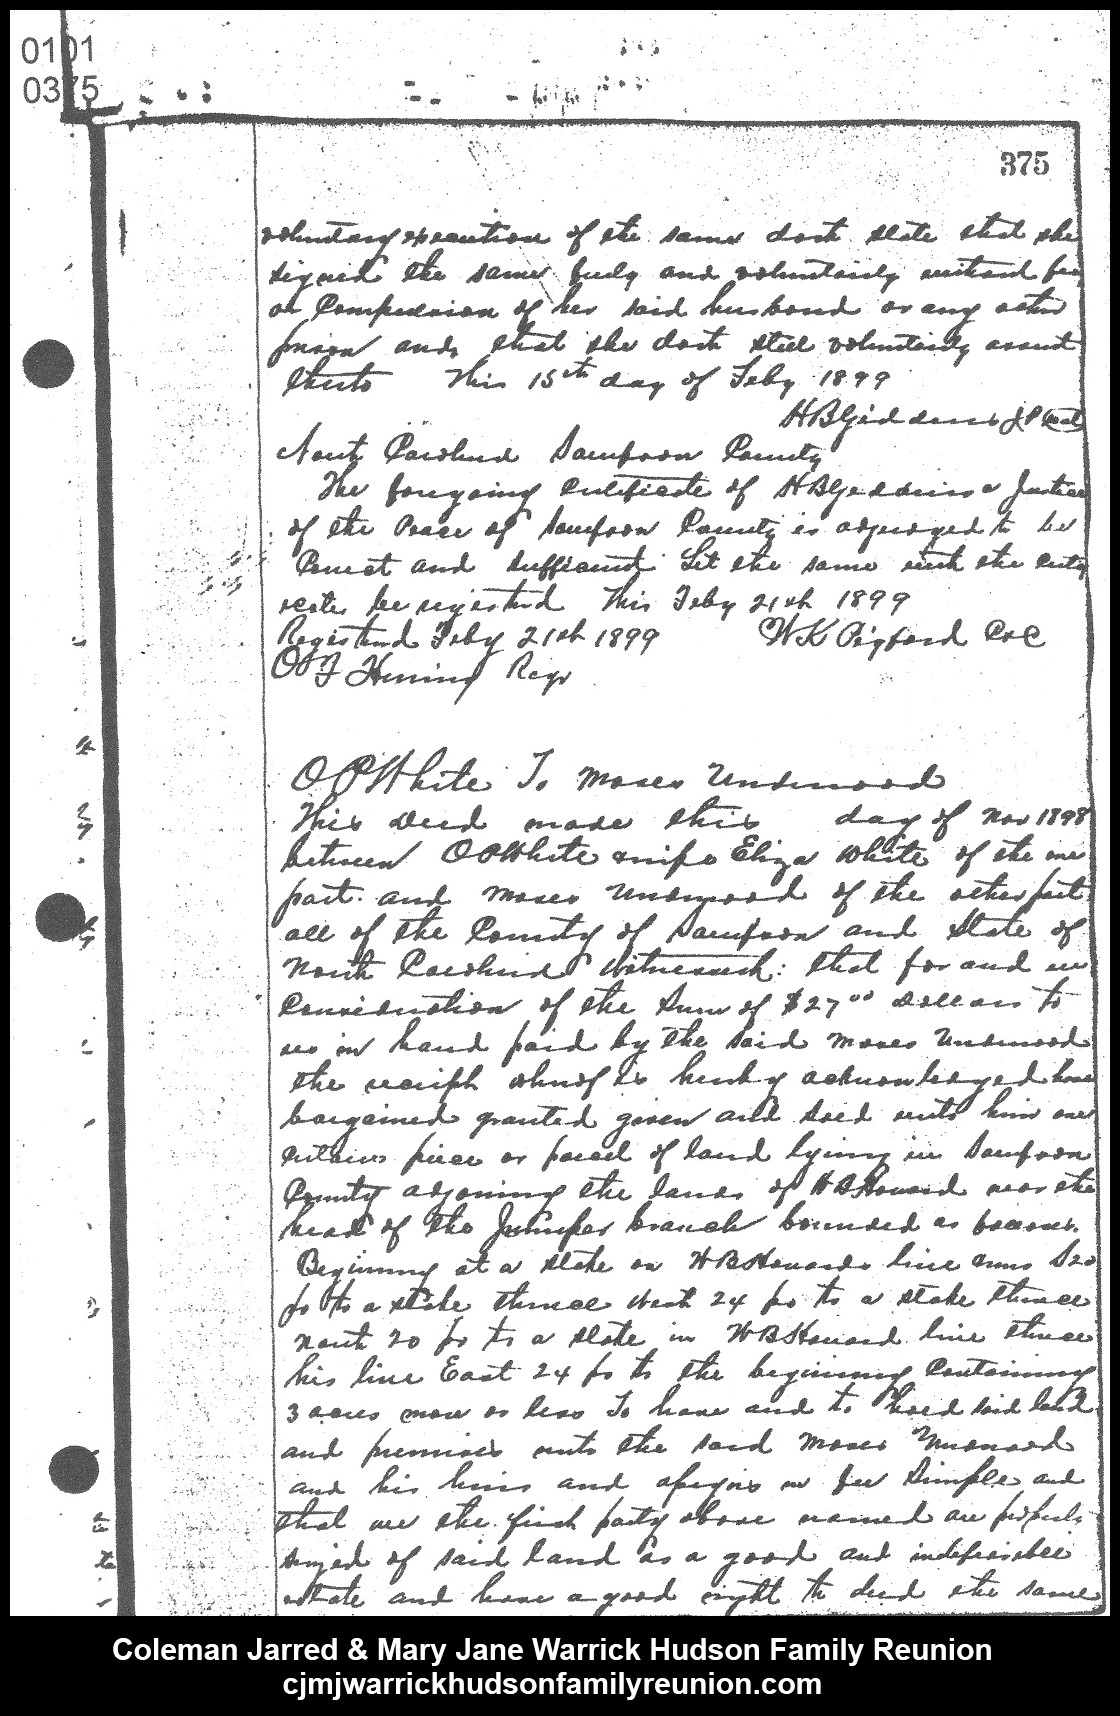 1899, 2-21 - Deed - R. G. Morisey to C. J. (Page 3 of 3)